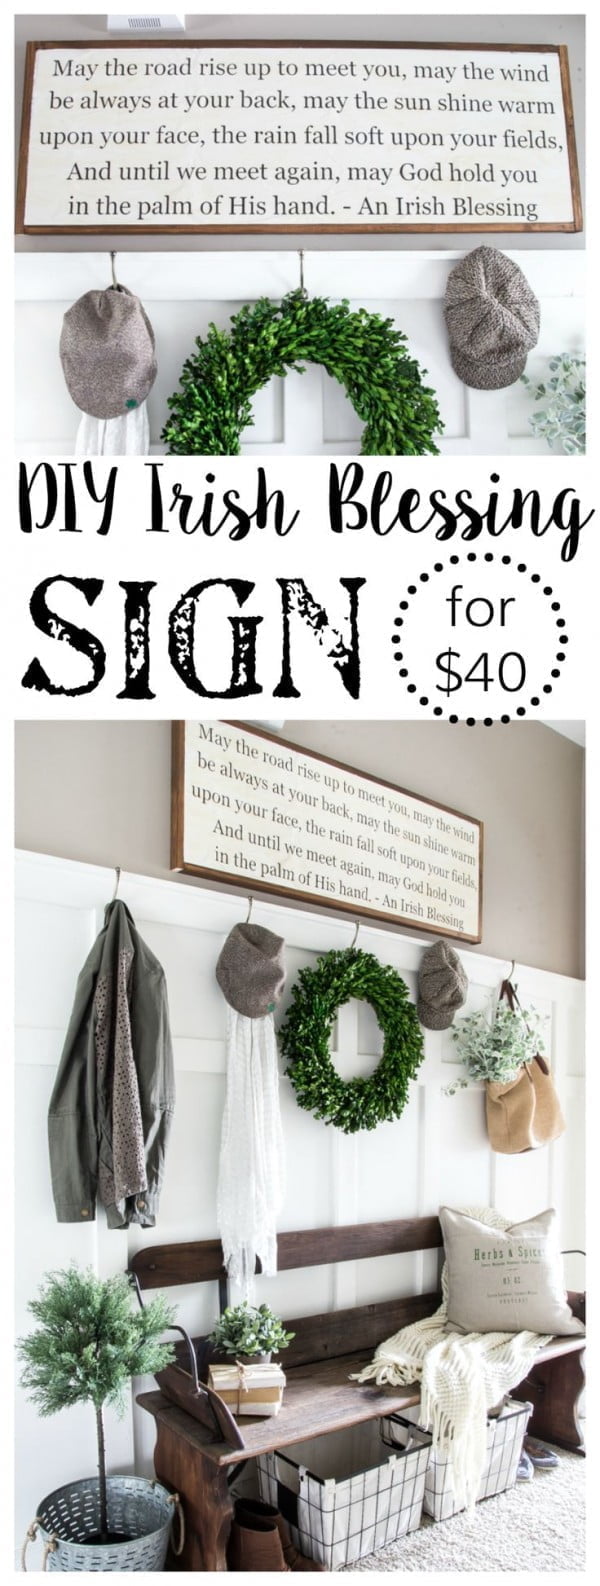 17 Fab DIY Farmhouse Signs You Can Make Yourself - Check out how to make an easy DIY Quote sign for farmhouse style decor